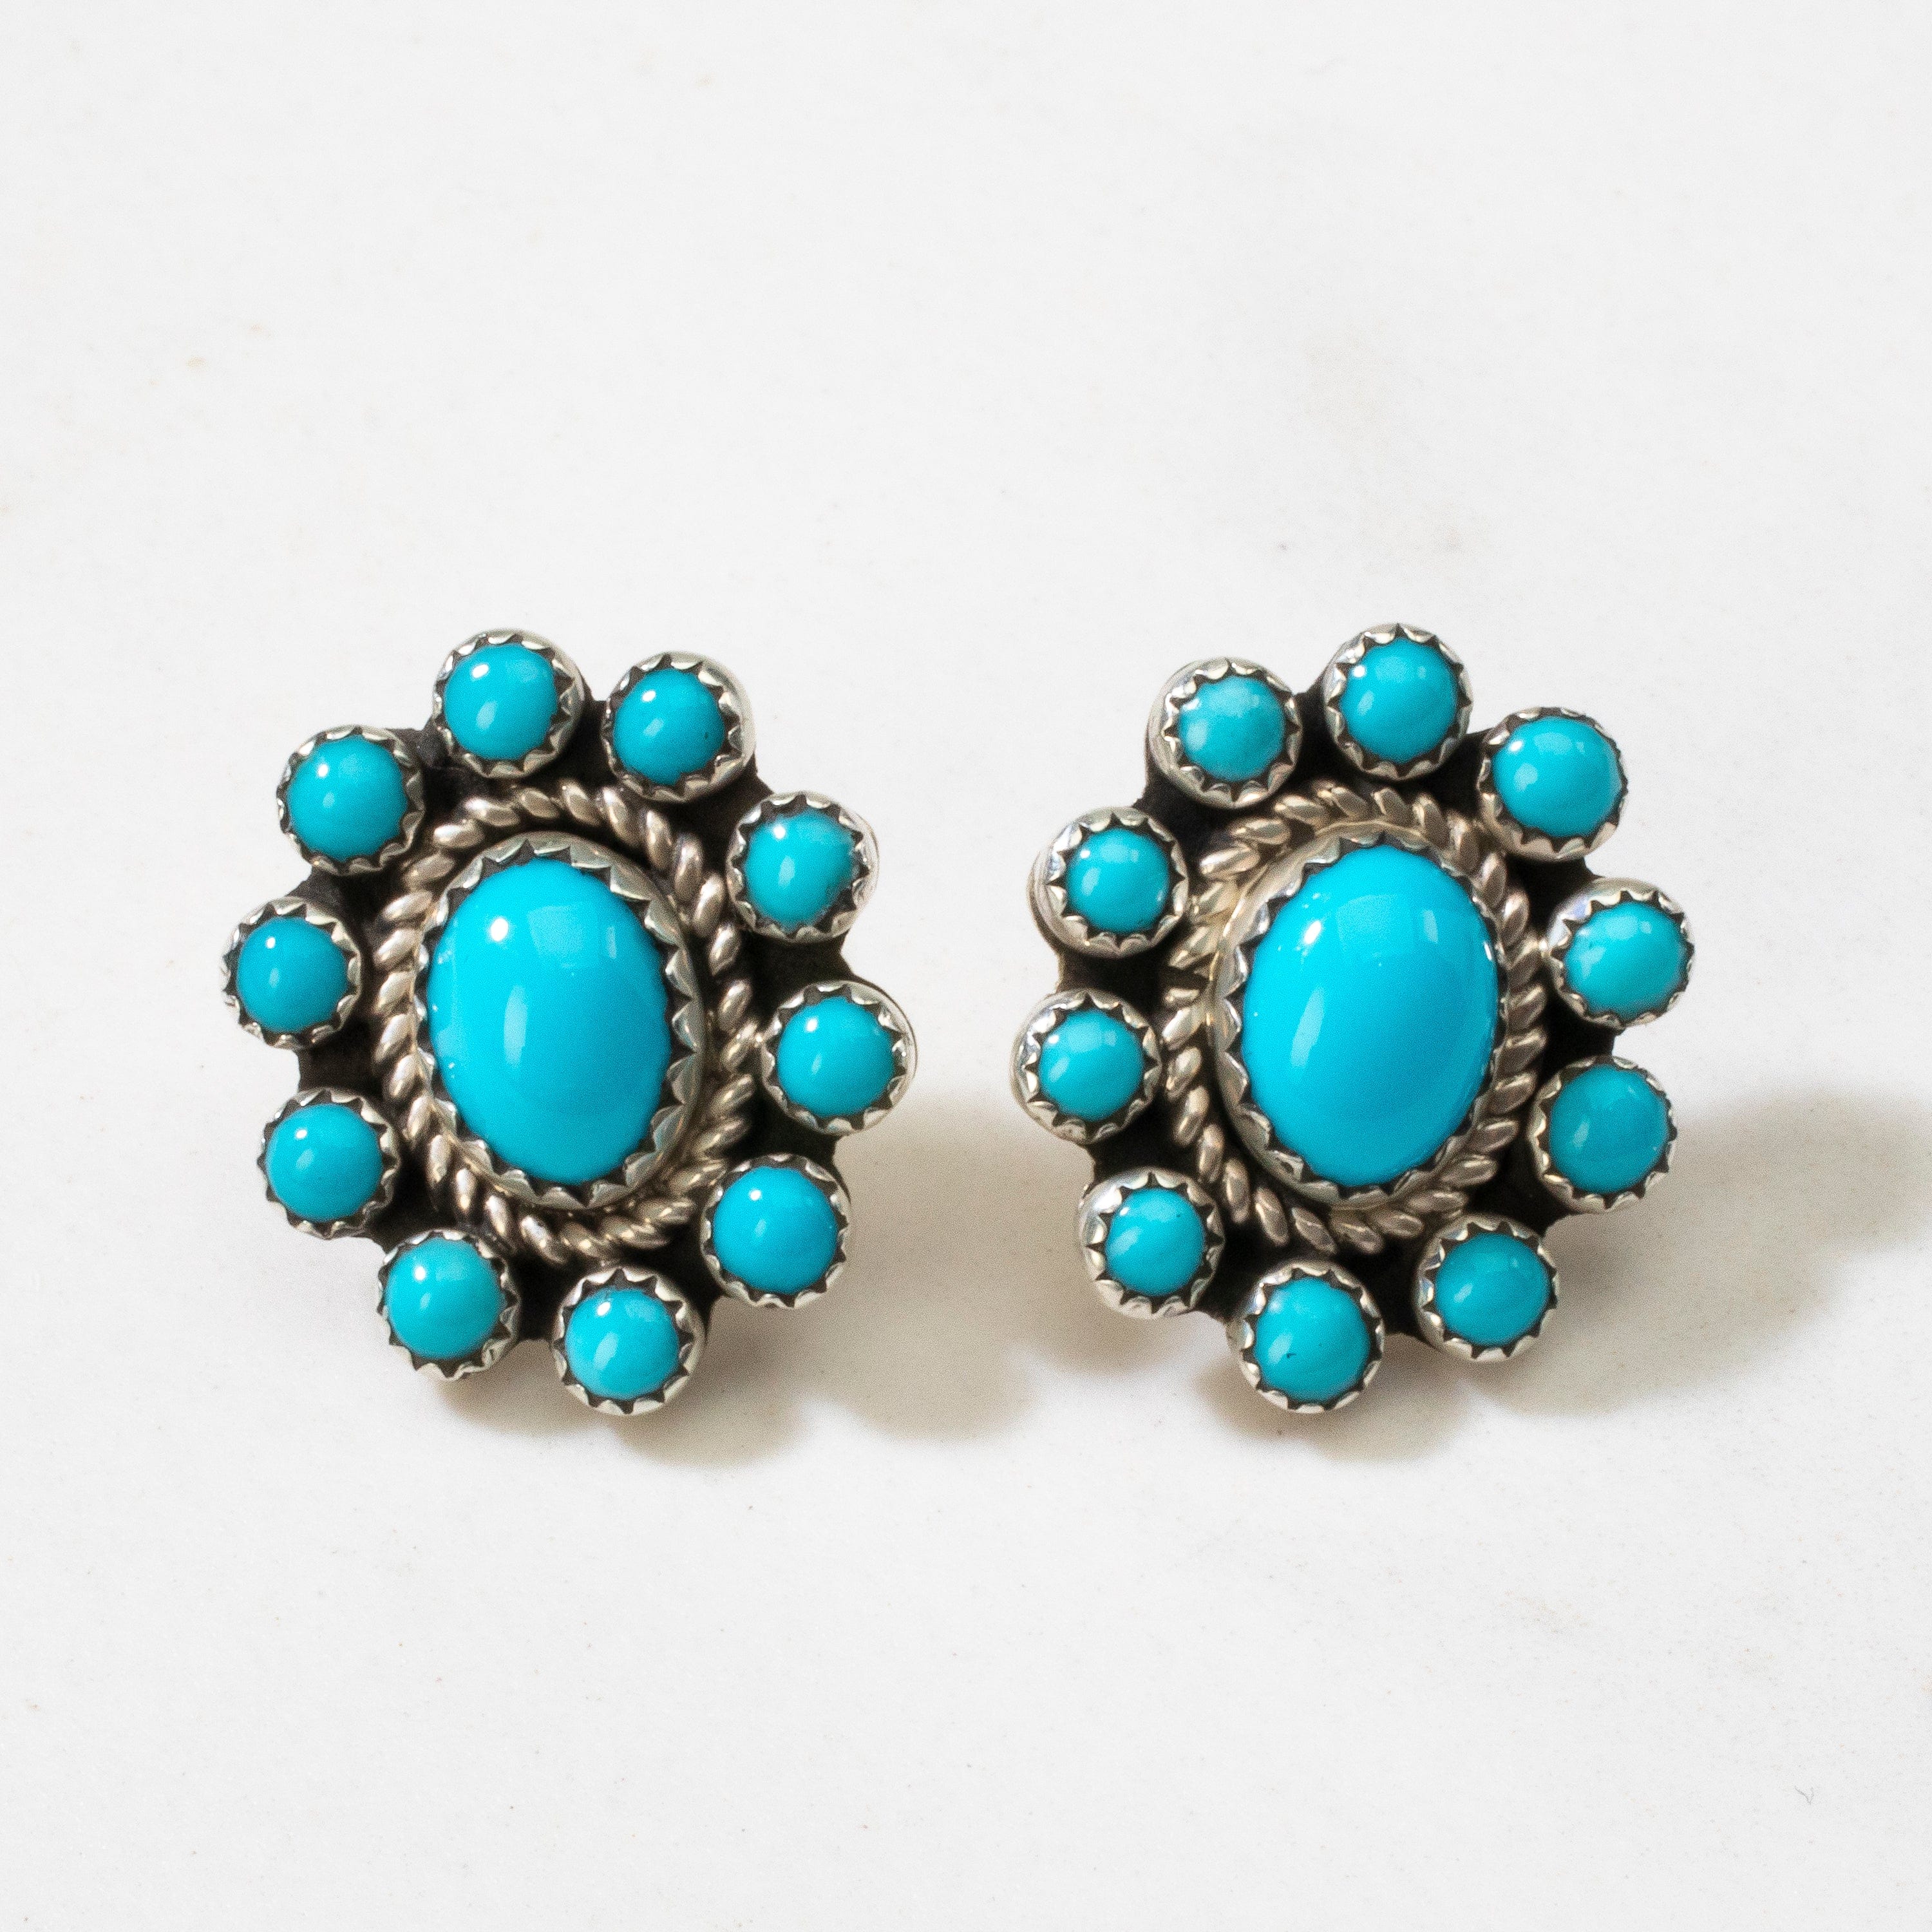 Kalifano Native American Jewelry Sleeping Beauty Turquoise Flower Navajo USA Native American Made 925 Sterling Silver Earrings with Stud Backing NAE400.039